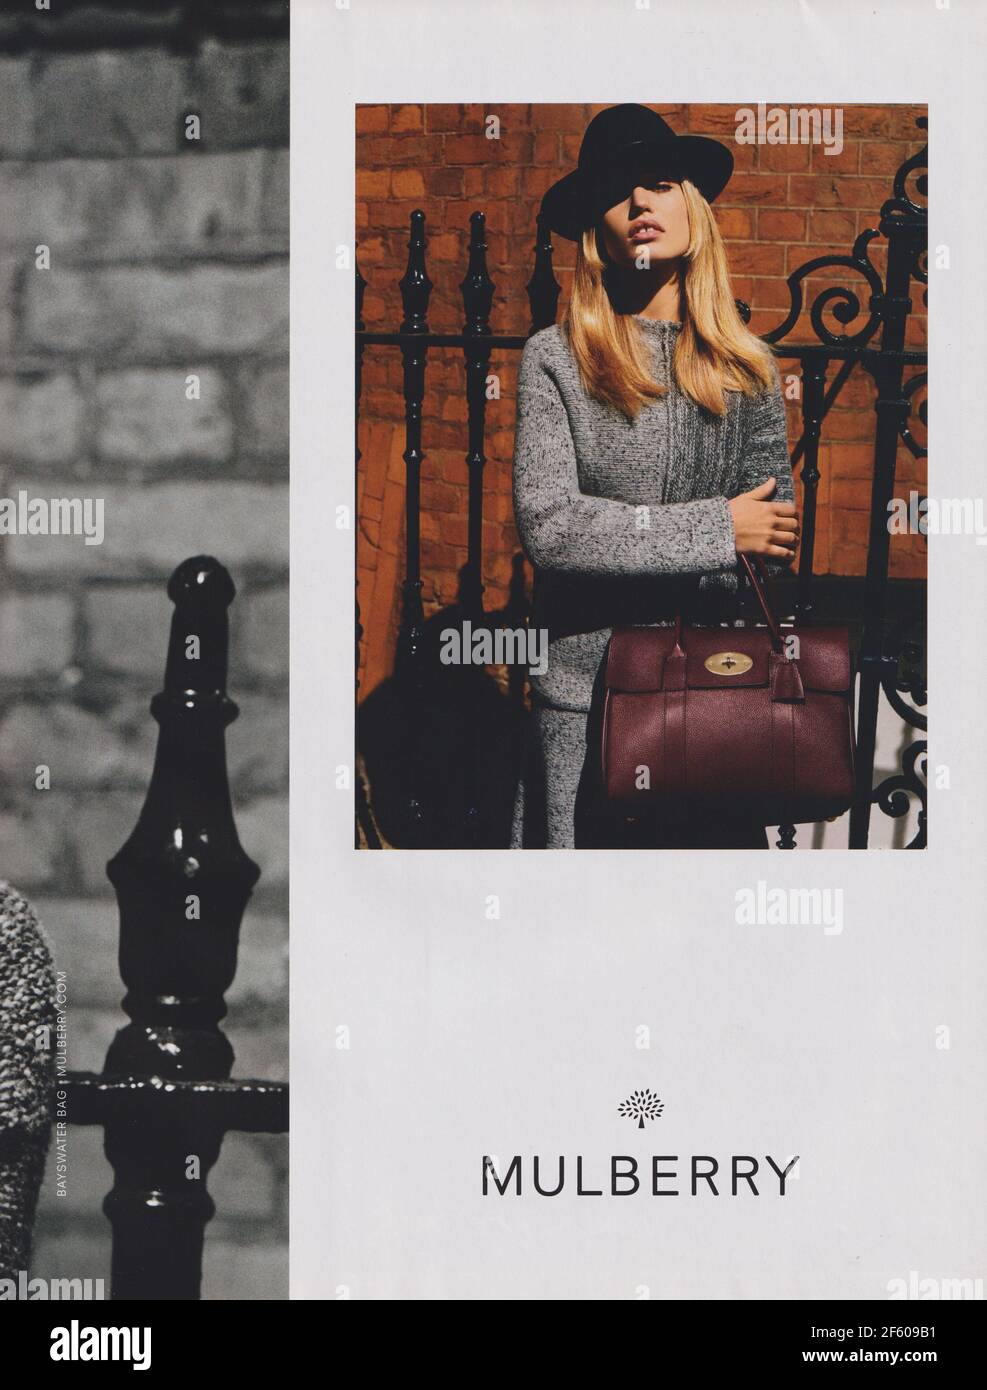 poster advertising Mulberry fashion house with Georgia May Jagger in paper magazine from 2015 year, advertisement, creative Mulberry advert from 2010s Stock Photo